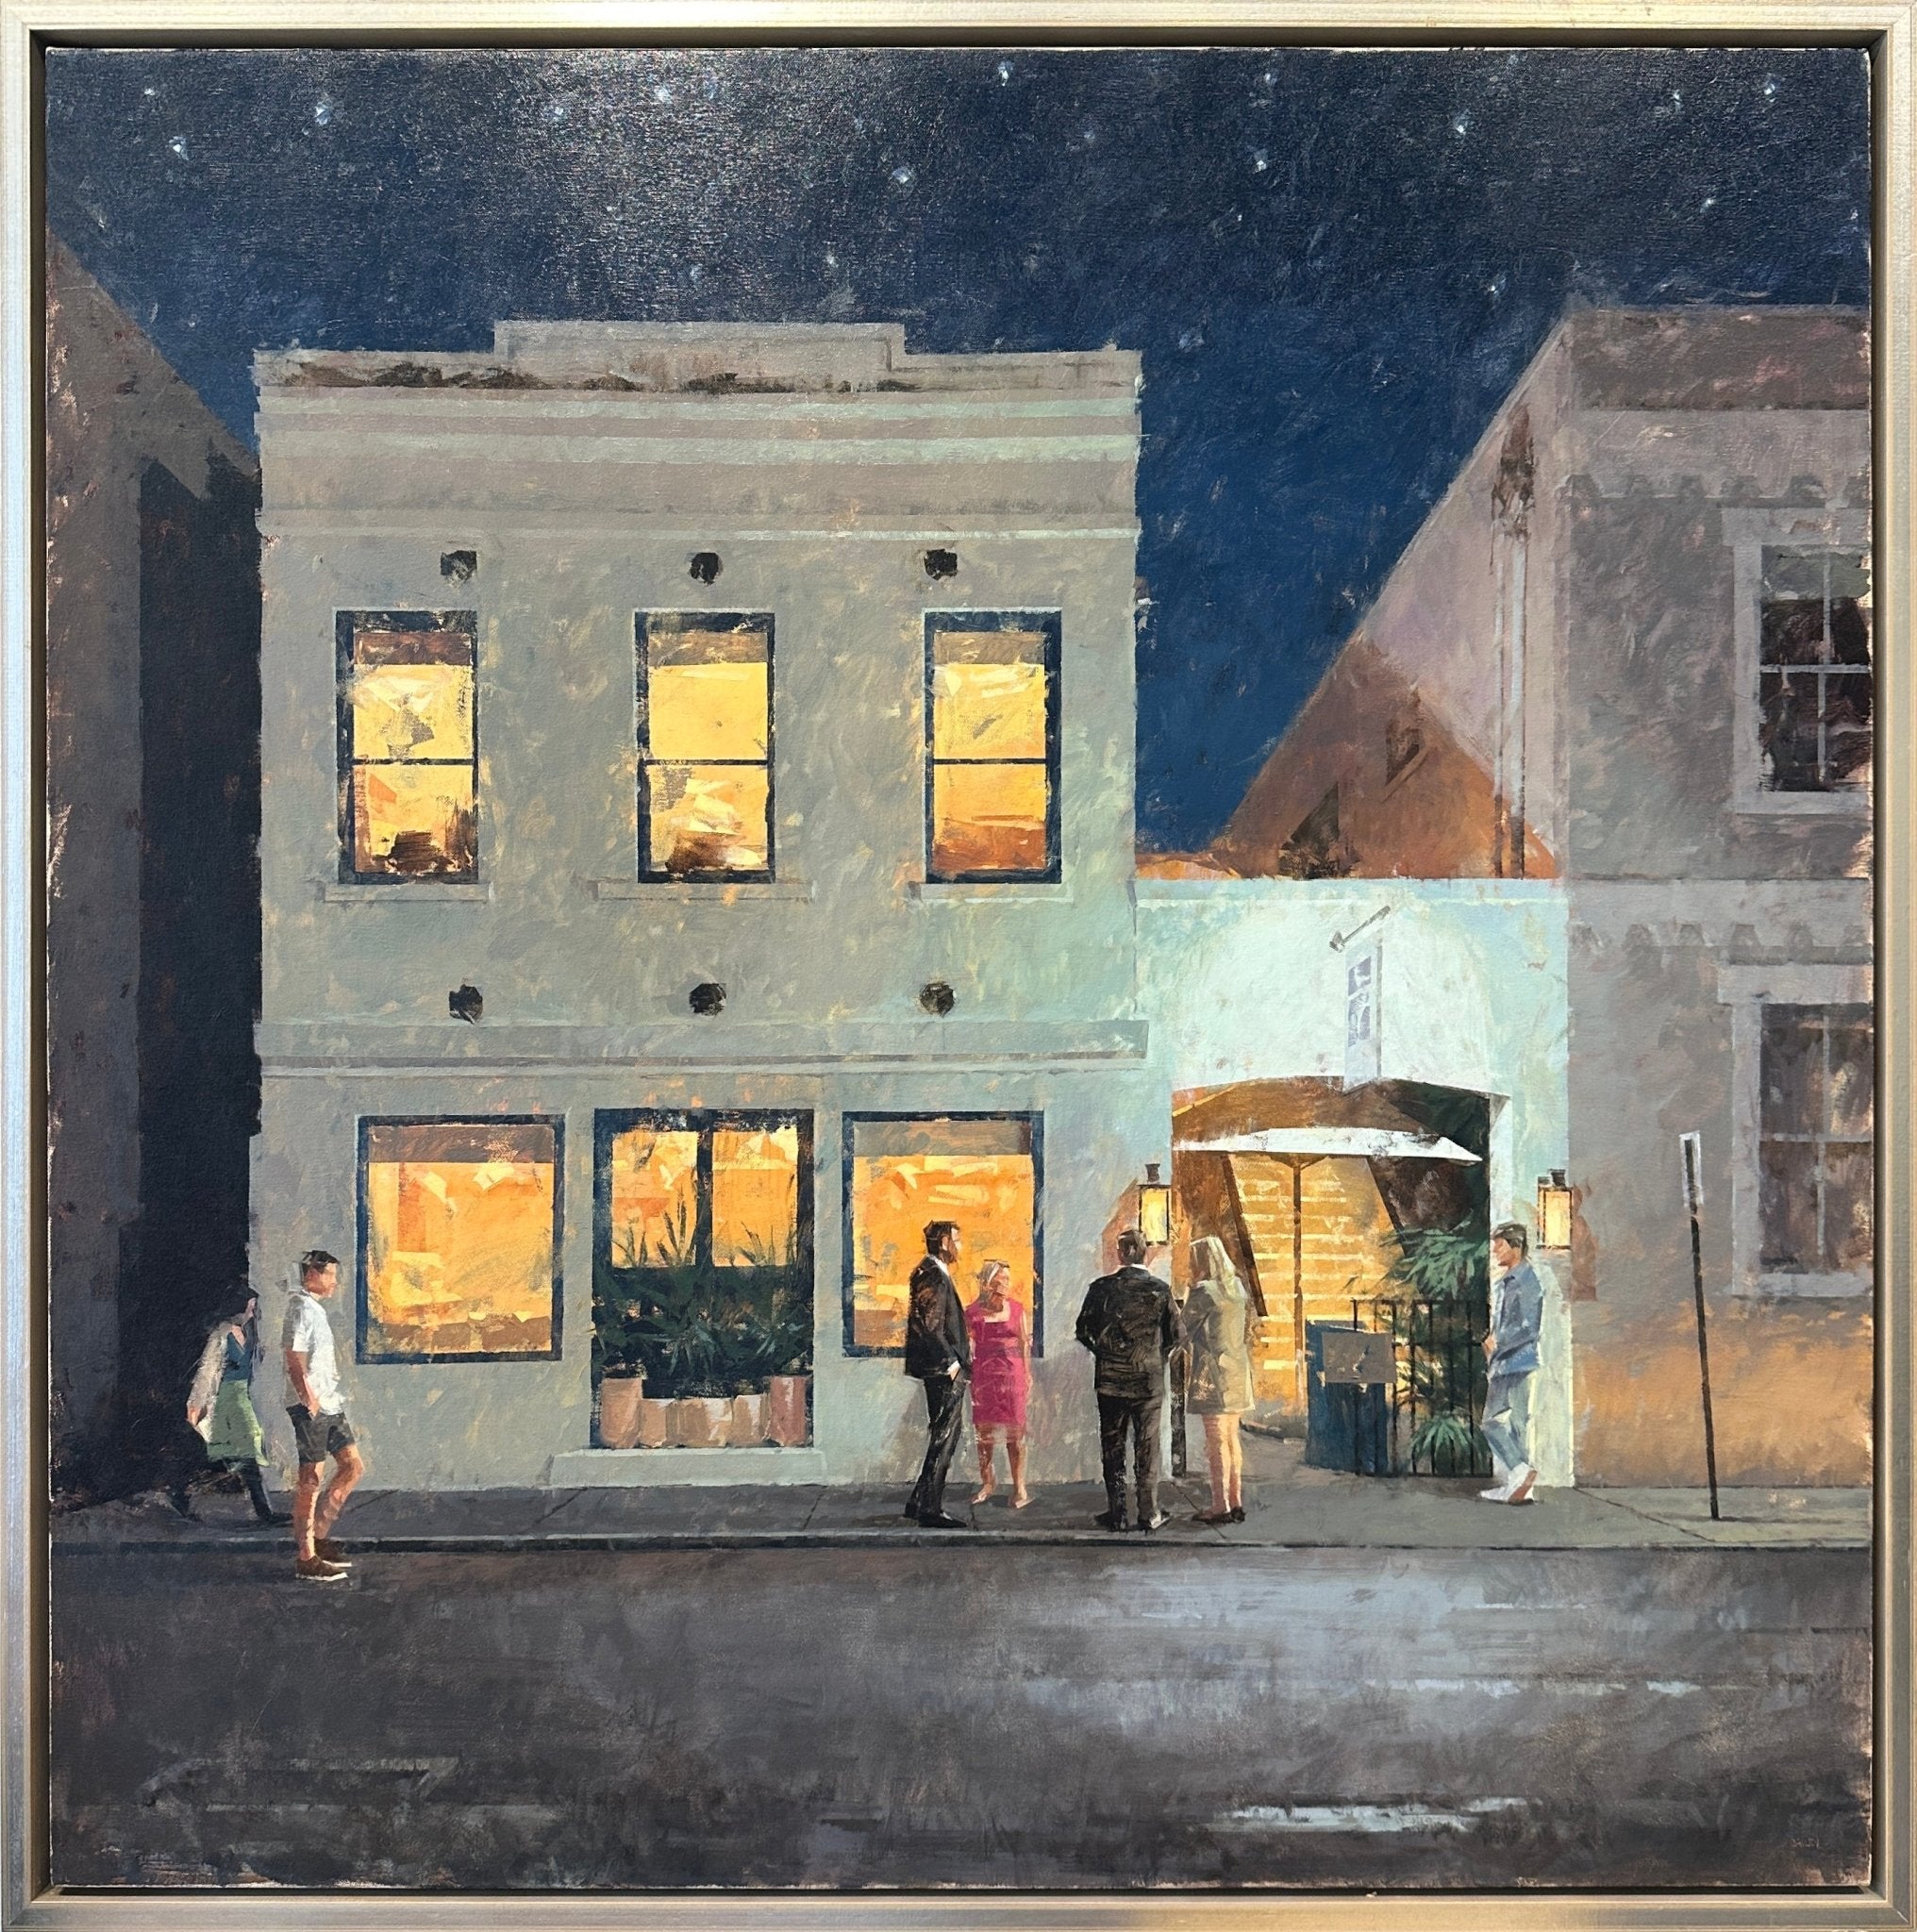 167 Bar Nocturne by Mark Bailey at LePrince Galleries